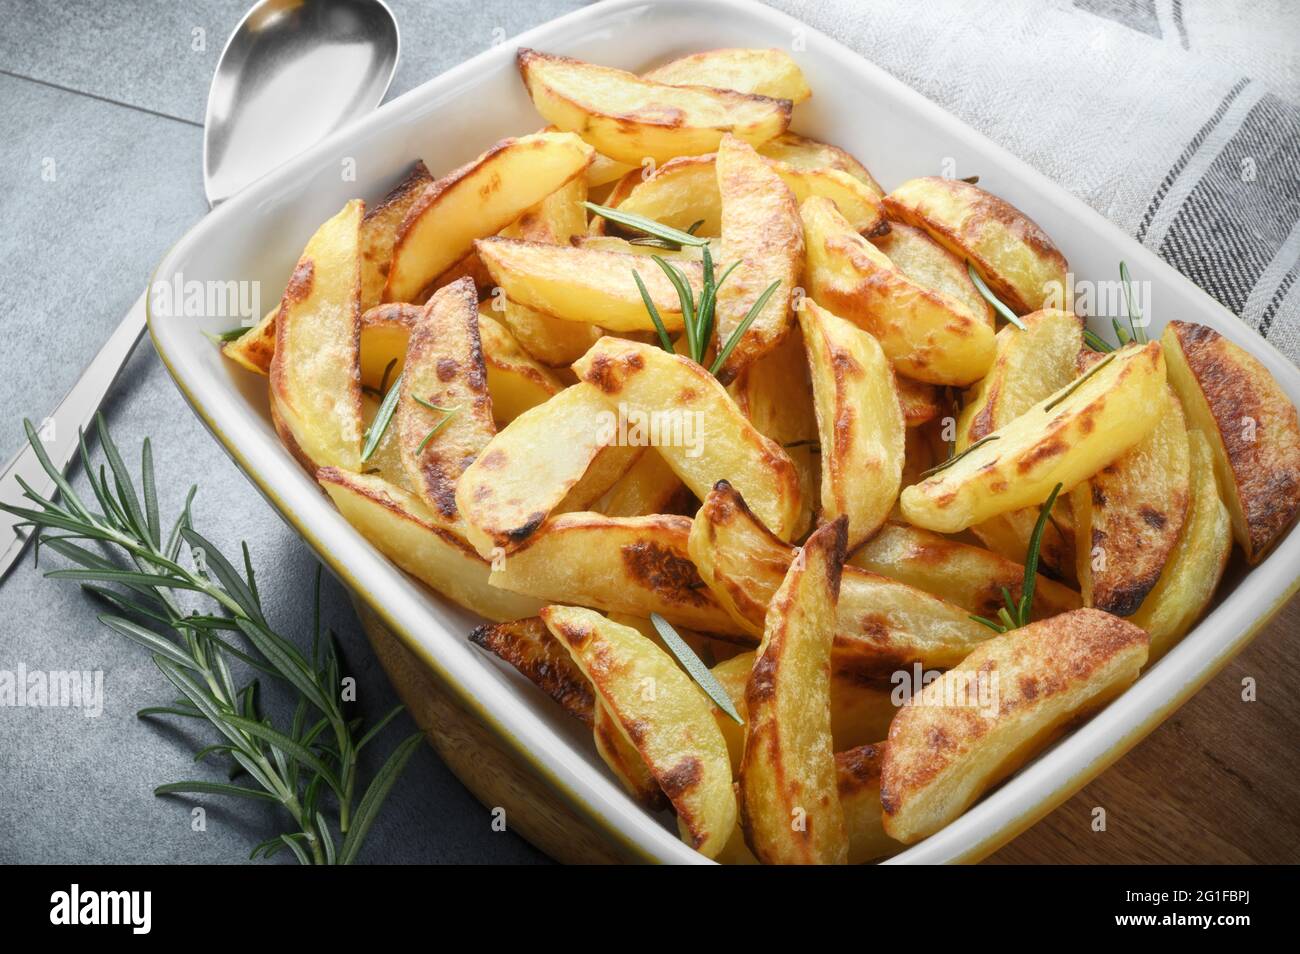 Crispy roast potatoes with fresh rosemary leaves in baking dish on gray background. Stock Photo